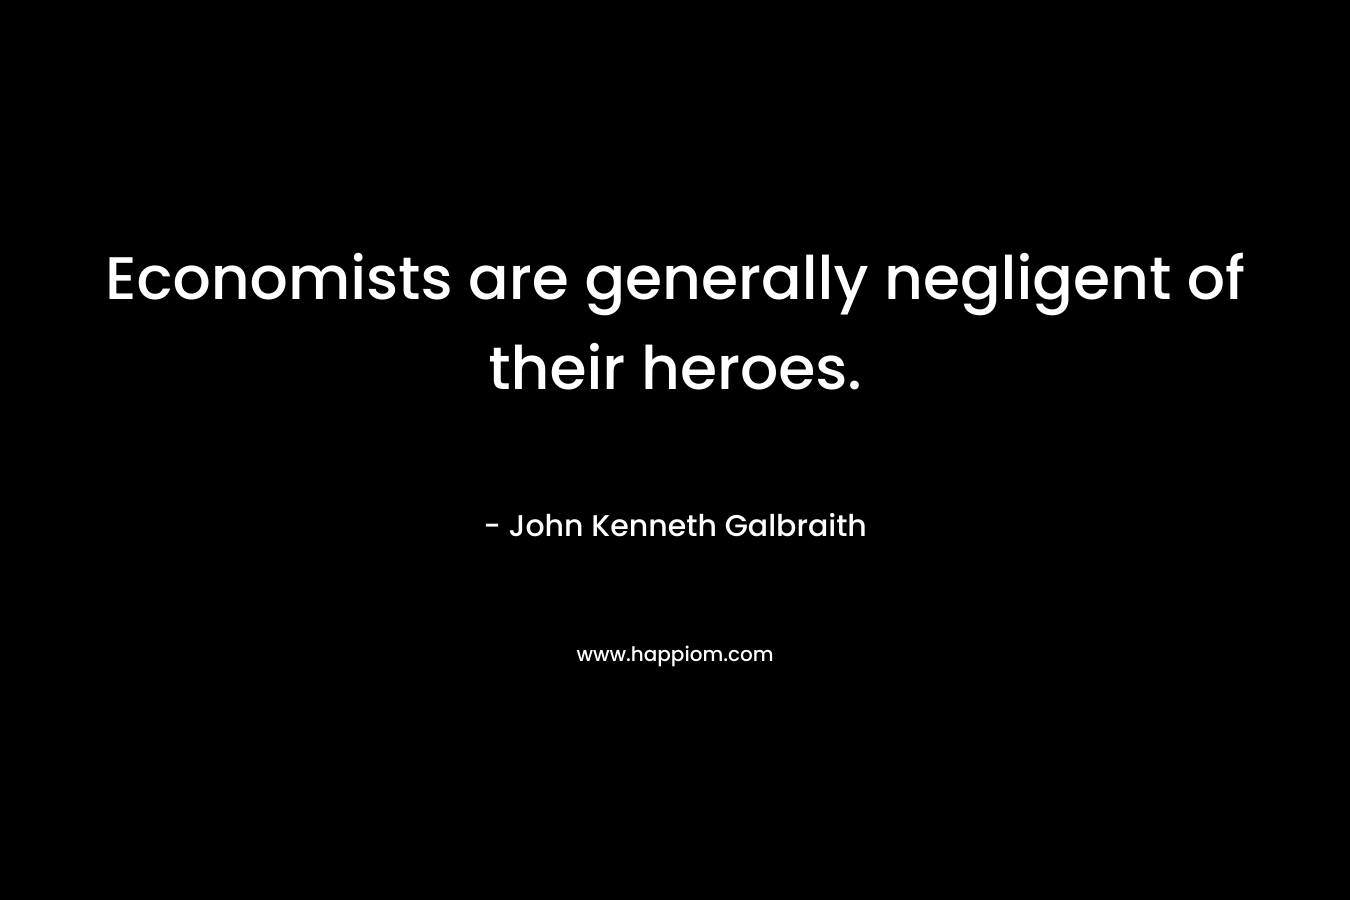 Economists are generally negligent of their heroes. – John Kenneth Galbraith